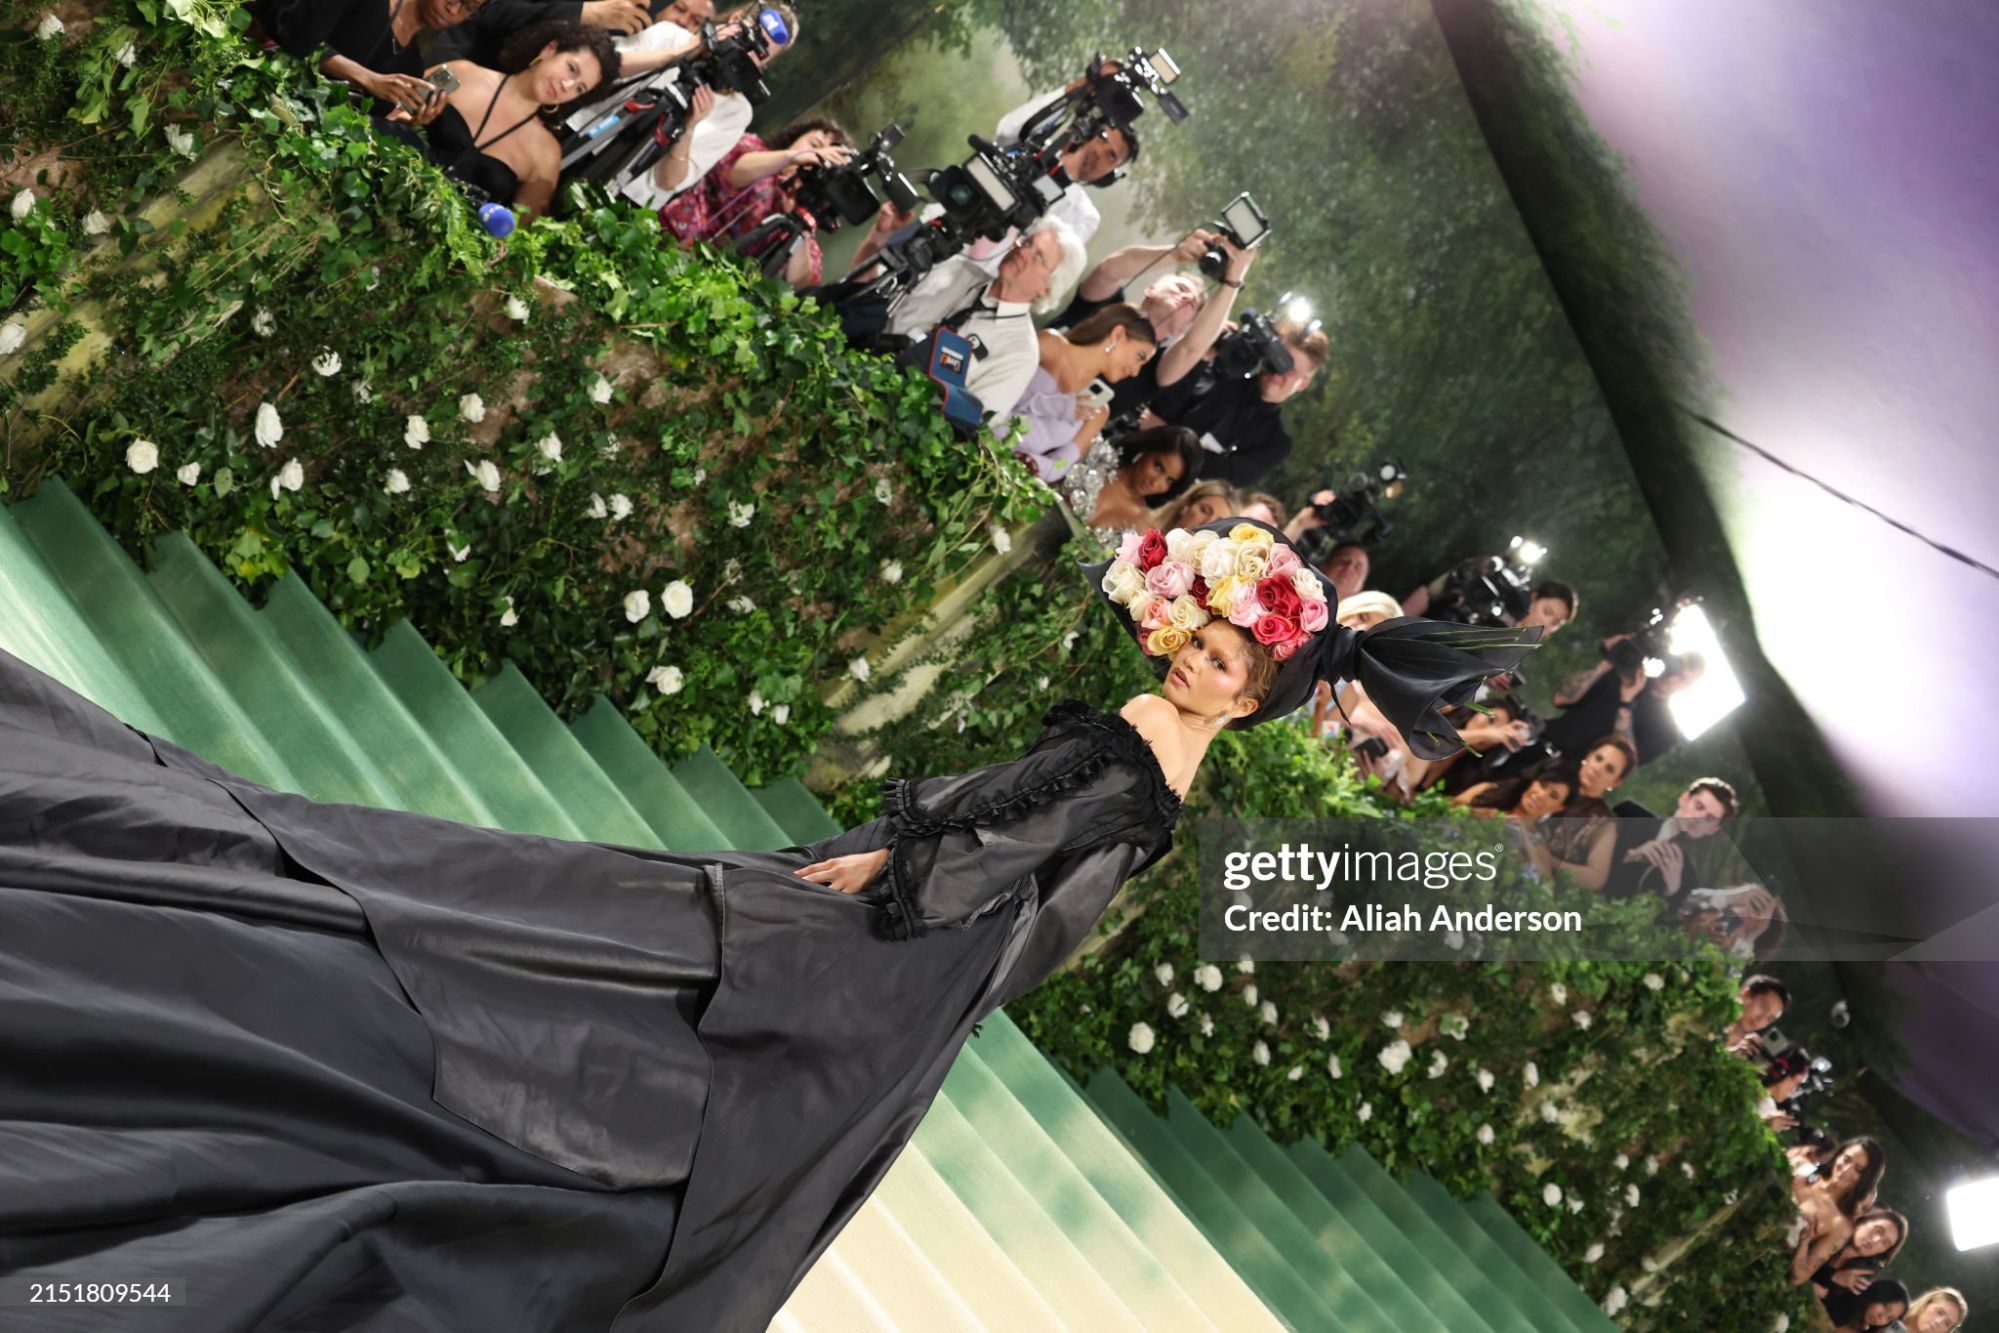 gettyimages-2151809544-2048x2048.jpg